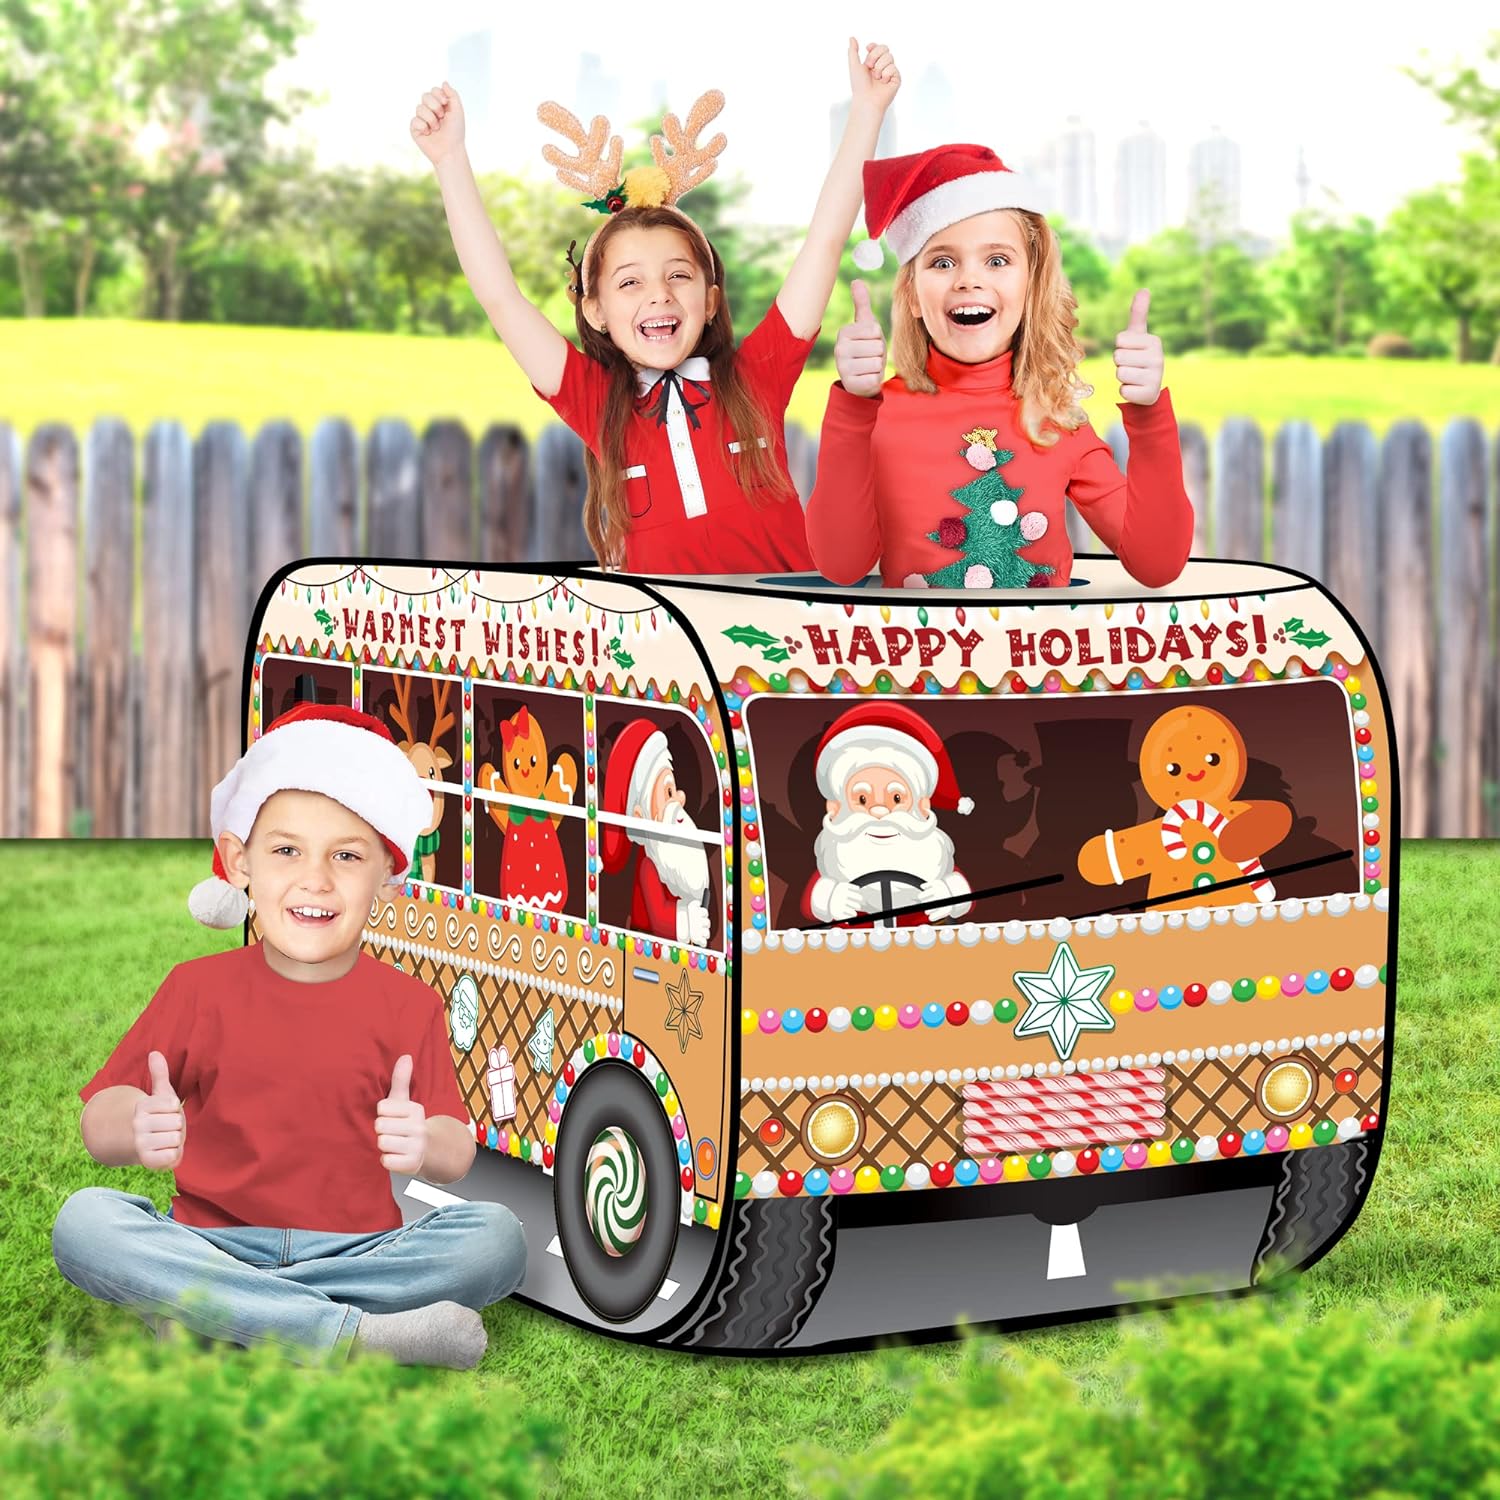 Christmas School Bus Pop Up Tent, Christmas Tent for Kids with a Carry Bag, Pop Up Play Tent for Hours of Fun, Great for Indoor Christmas Decorations, 43.5 x 28 x 26.5 Inches